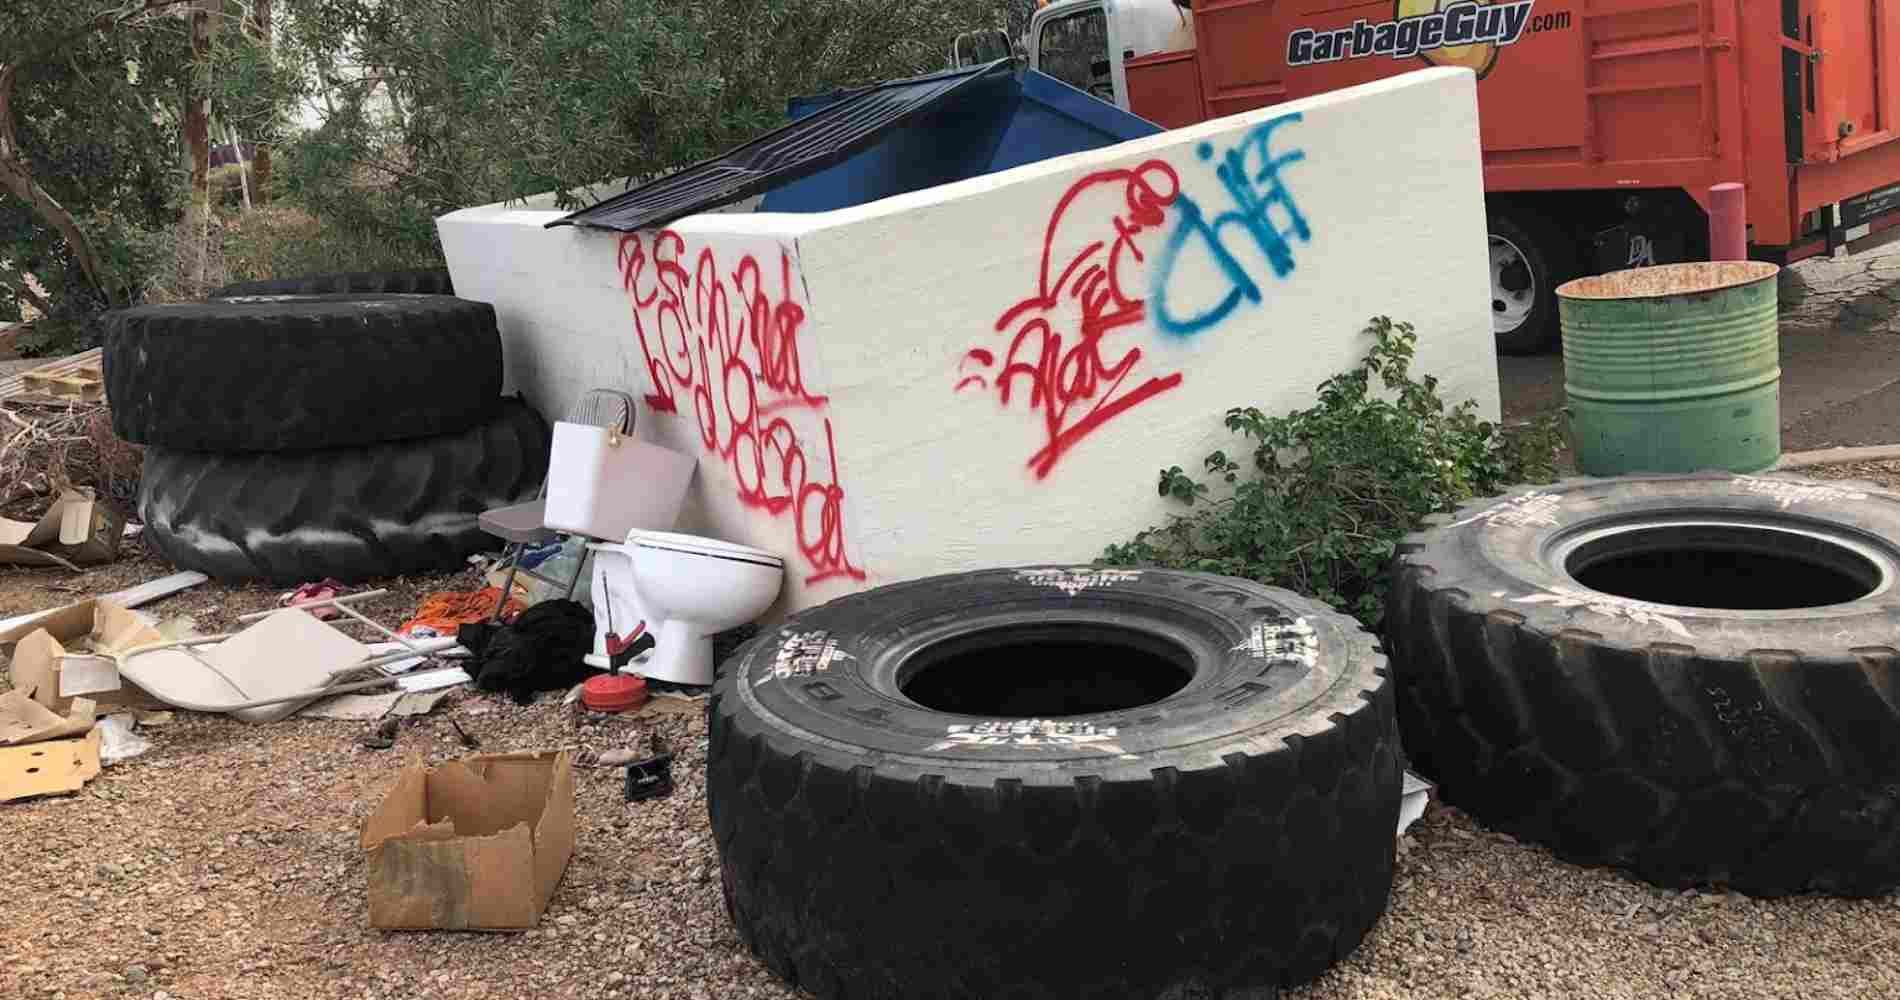 #1 for Tire Disposal in Florence, AZ with Over 1200 5-Star Reviews!